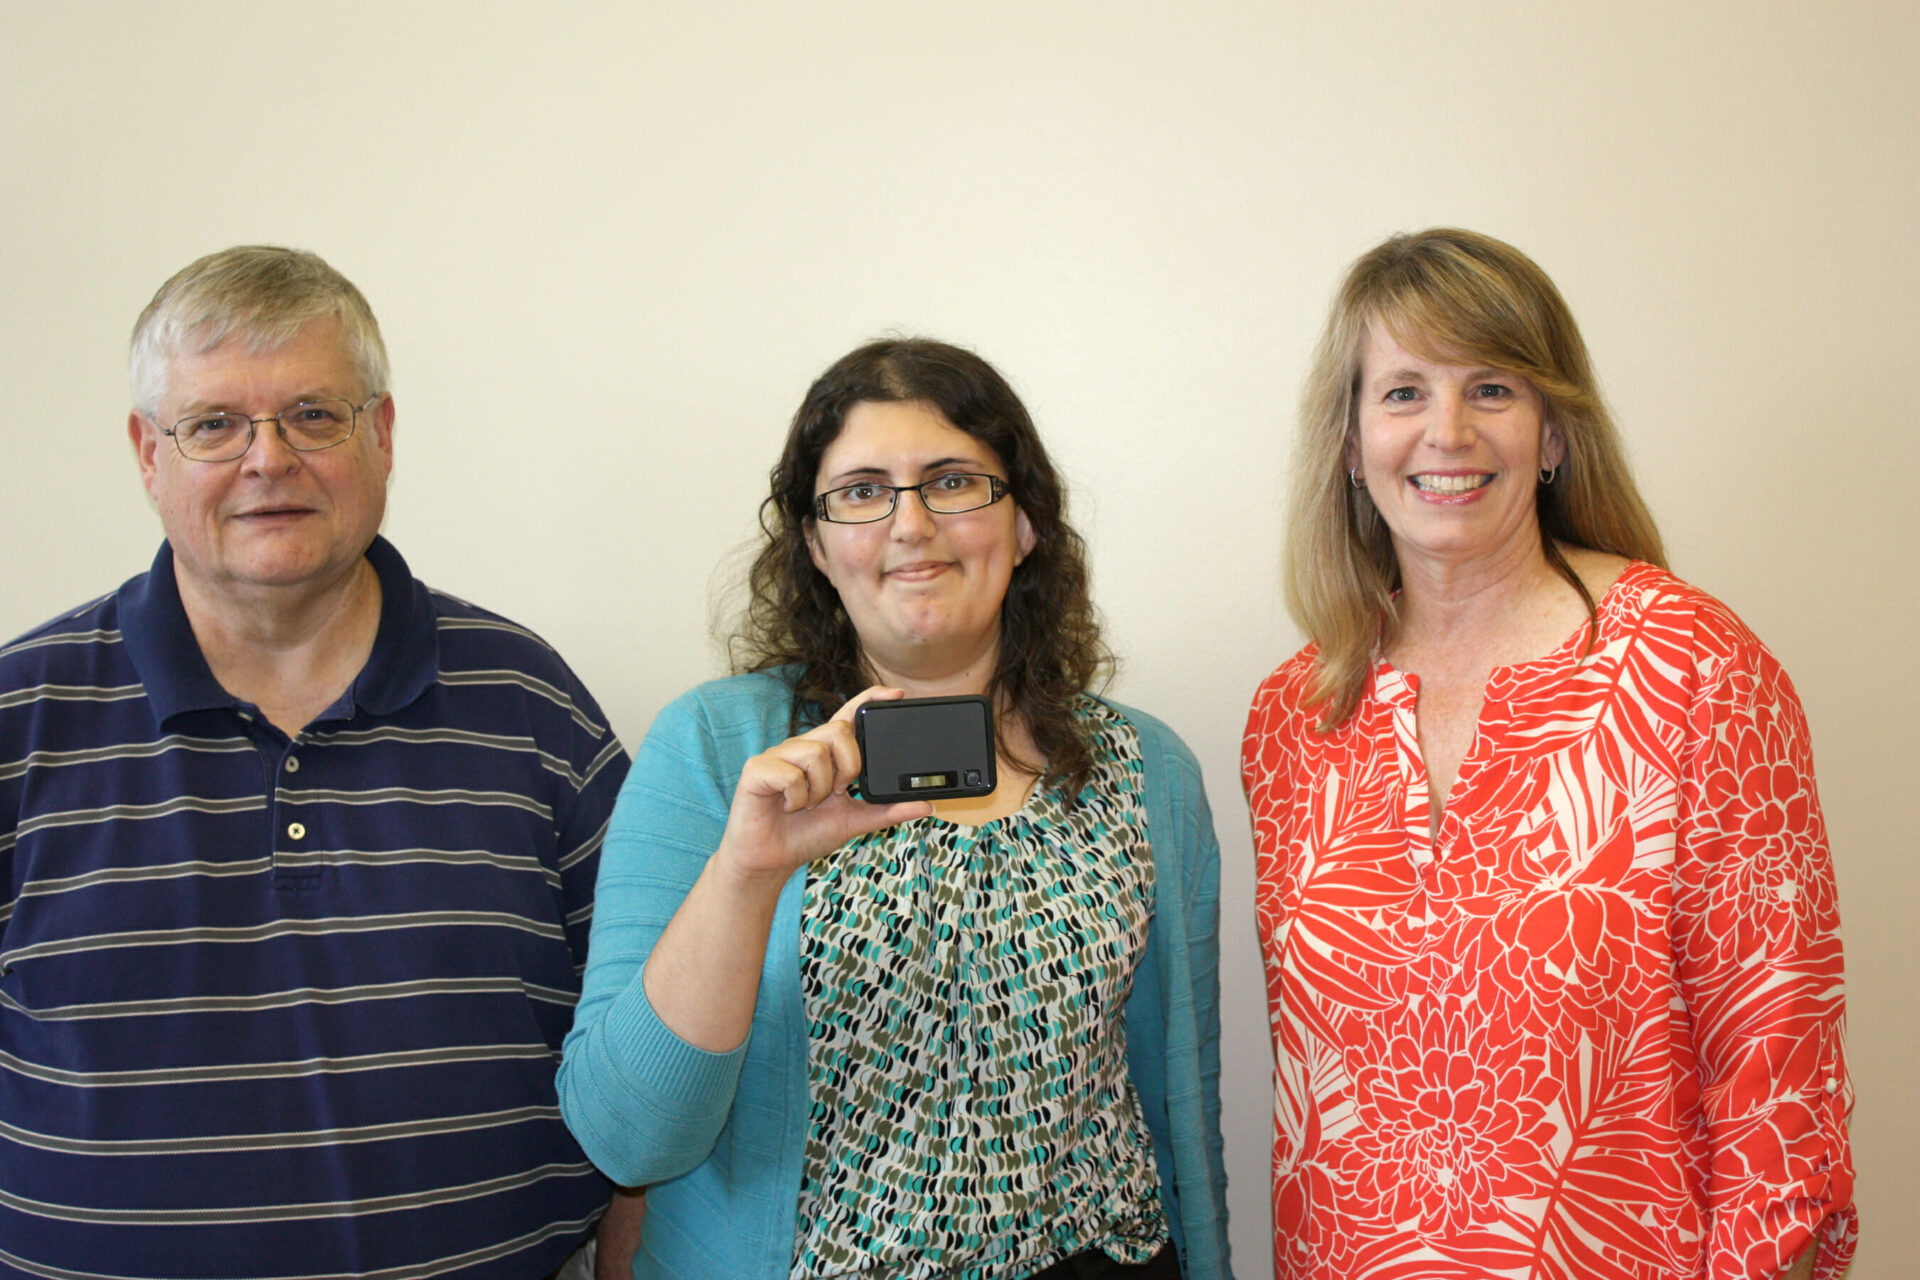 The Northwest Mississippi Community College library on the Senatobia campus is now offering Wi-Fi hotspots to checkout for students who have no internet access at home. Showing off one of the Wi-Fi devices available for check out is (left to right) Glenn McDowell, system administrator, Maya Berry, digital librarian and Maggie Moran, director of Learning Resources. (Photo by Allen Brewer, Northwest journalism student)